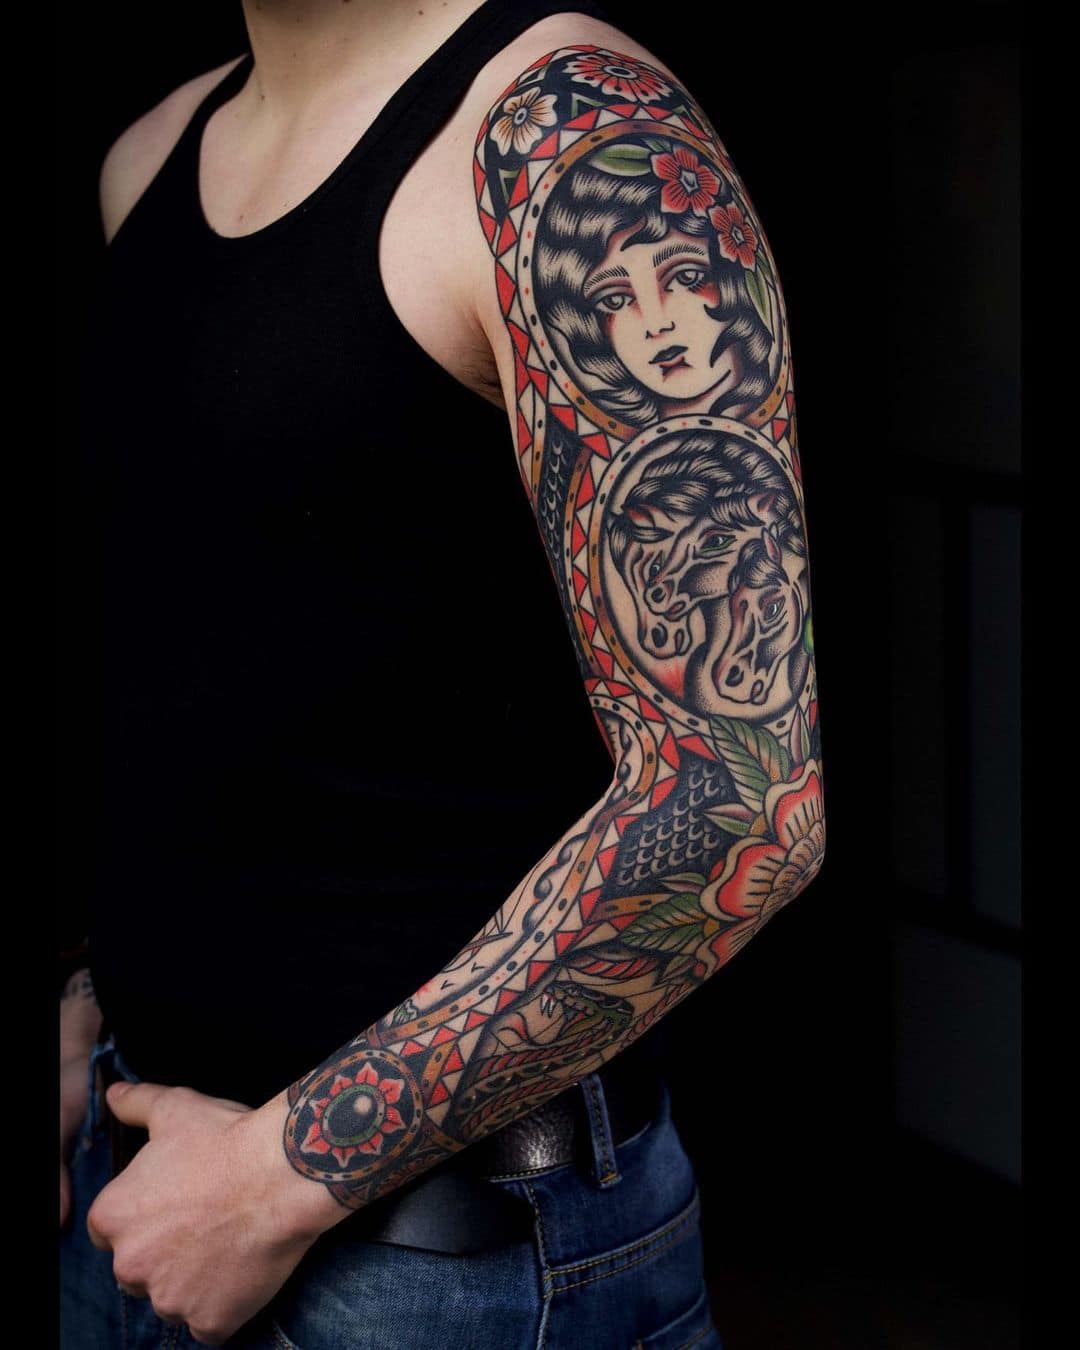 How To Make A Sleeve Tattoo Flow And Look Great, 52% OFF